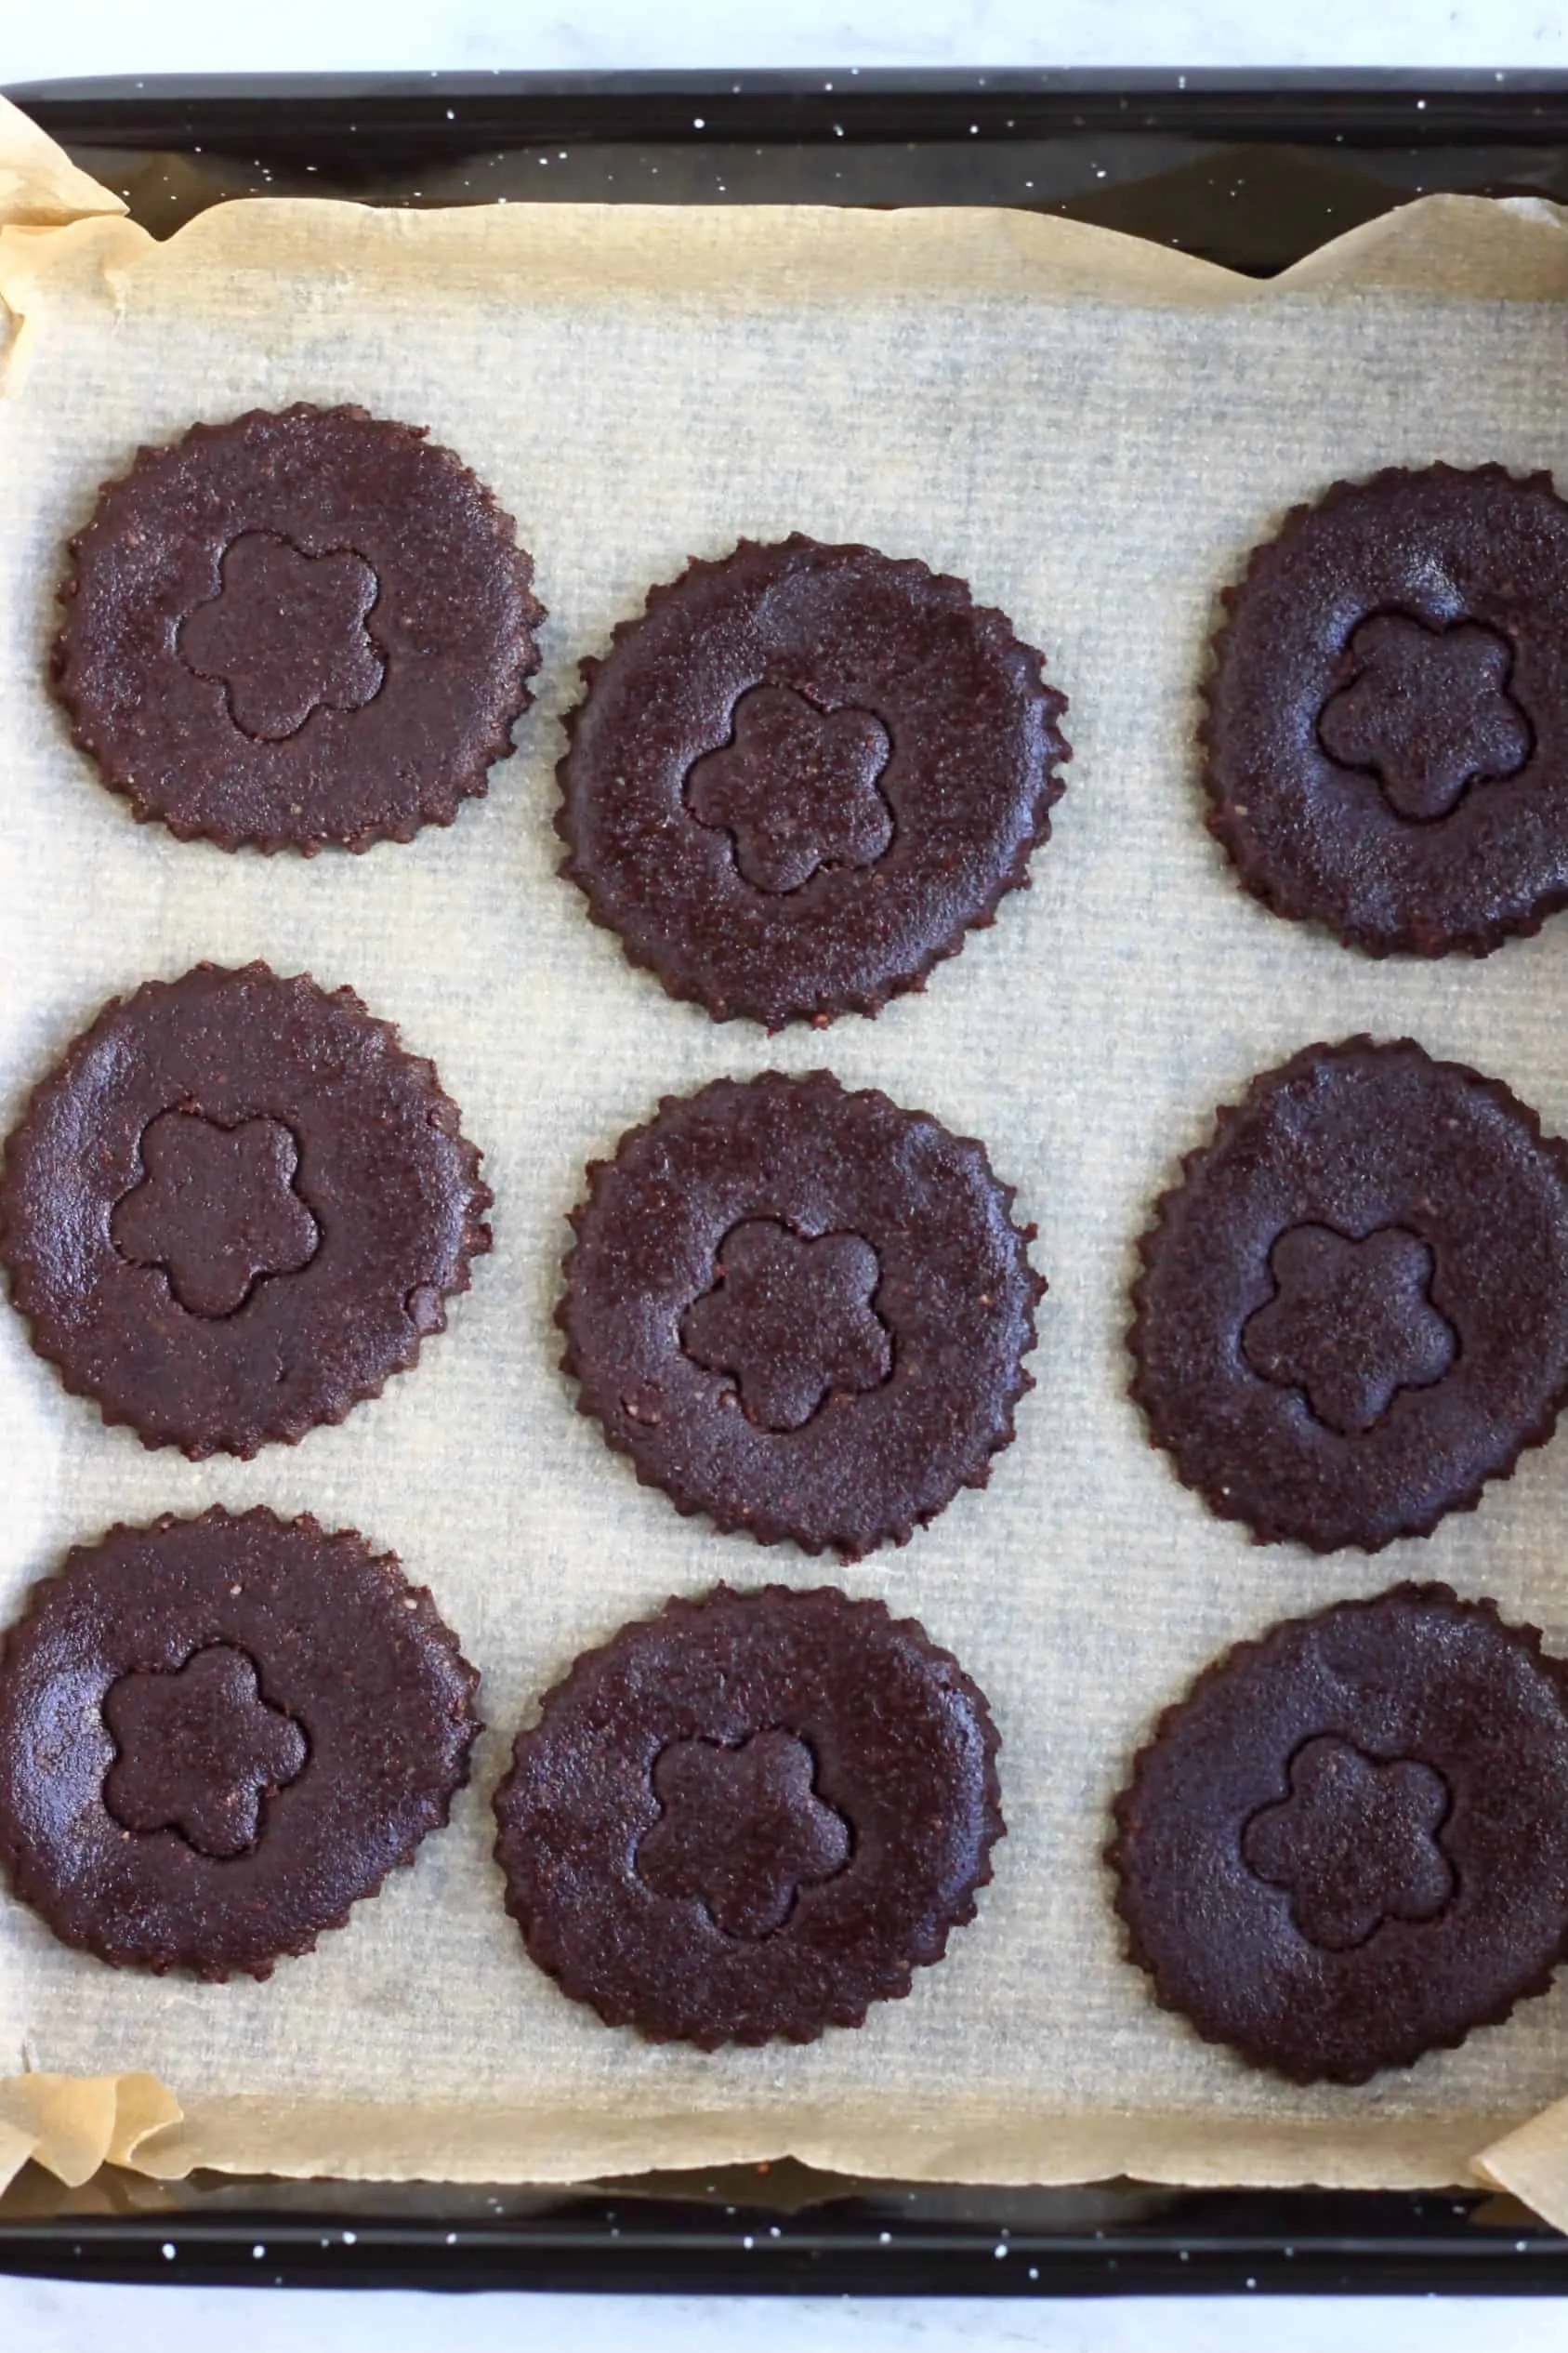 Nine raw gluten-free vegan homemade oreo cookie circles decorated with flower stamps on a baking tray lined with baking paper